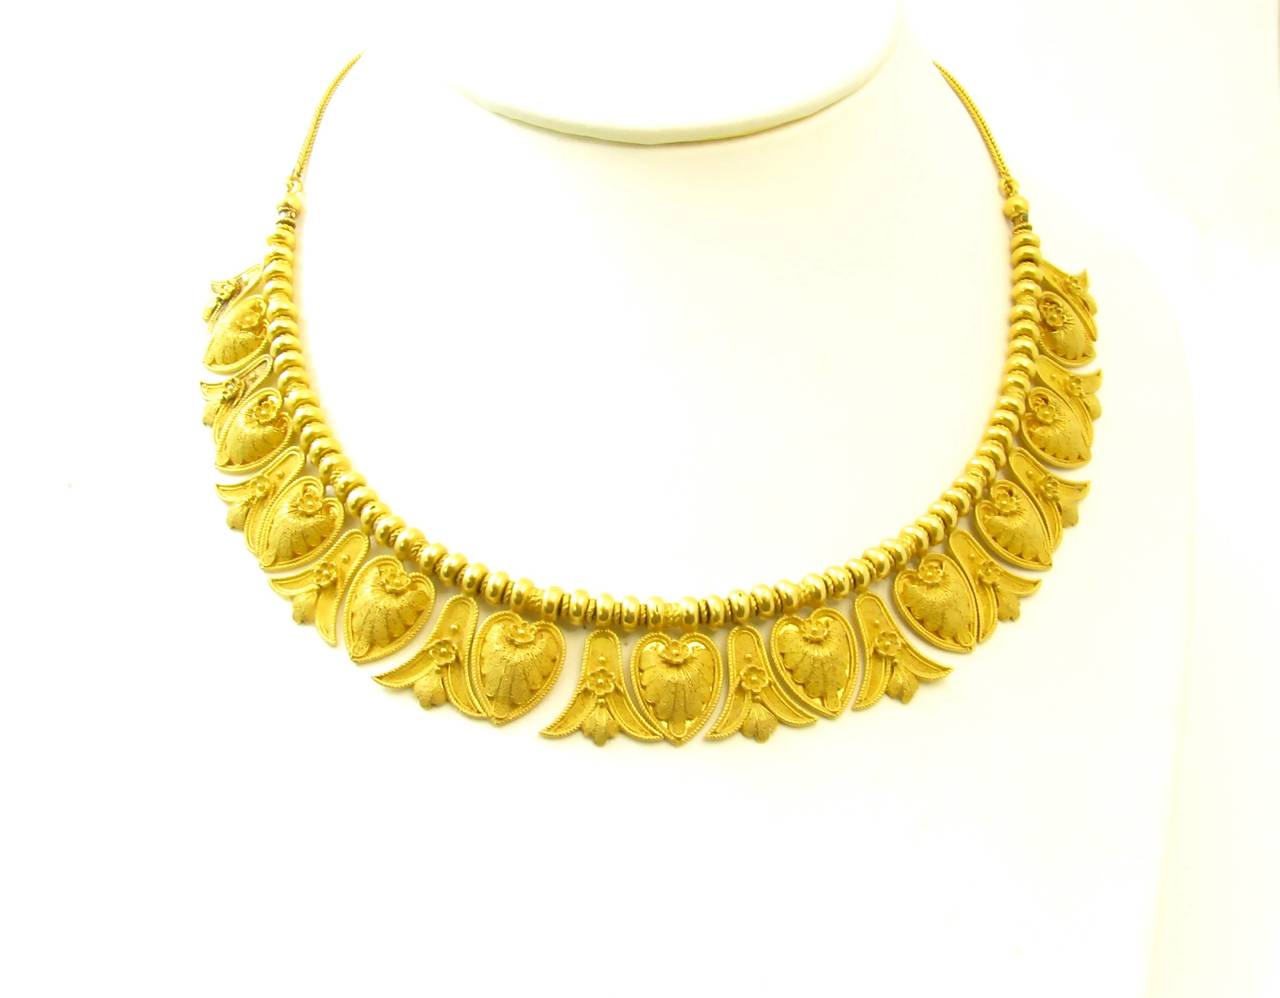 An antique Italian 18 karat yellow gold Etruscan style necklace, Circa 1870s.  The antique fitted box is signed Achille Squadrilli, Piazza Vittoria Napoli.  The necklace is designed as alternating pendants of granulated bellflower and anthemion